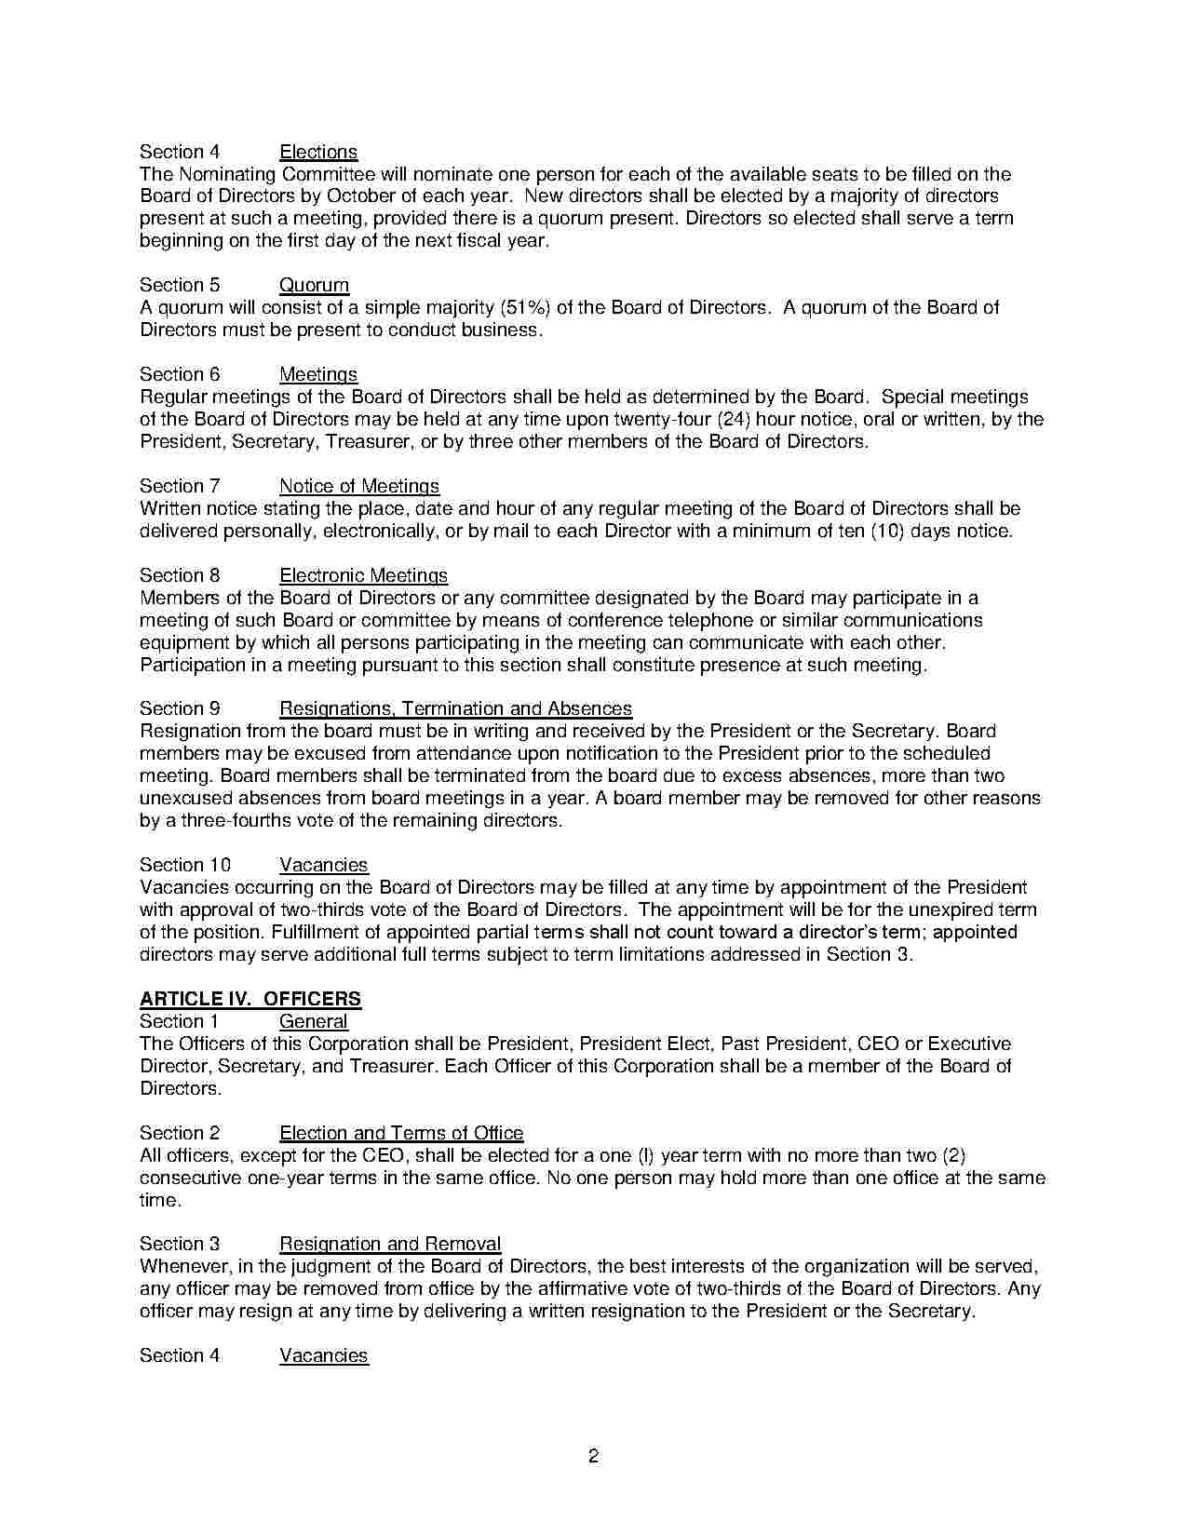 download-corporate-bylaws-style-8-template-for-free-at-in-corporate-bylaws-template-word-best